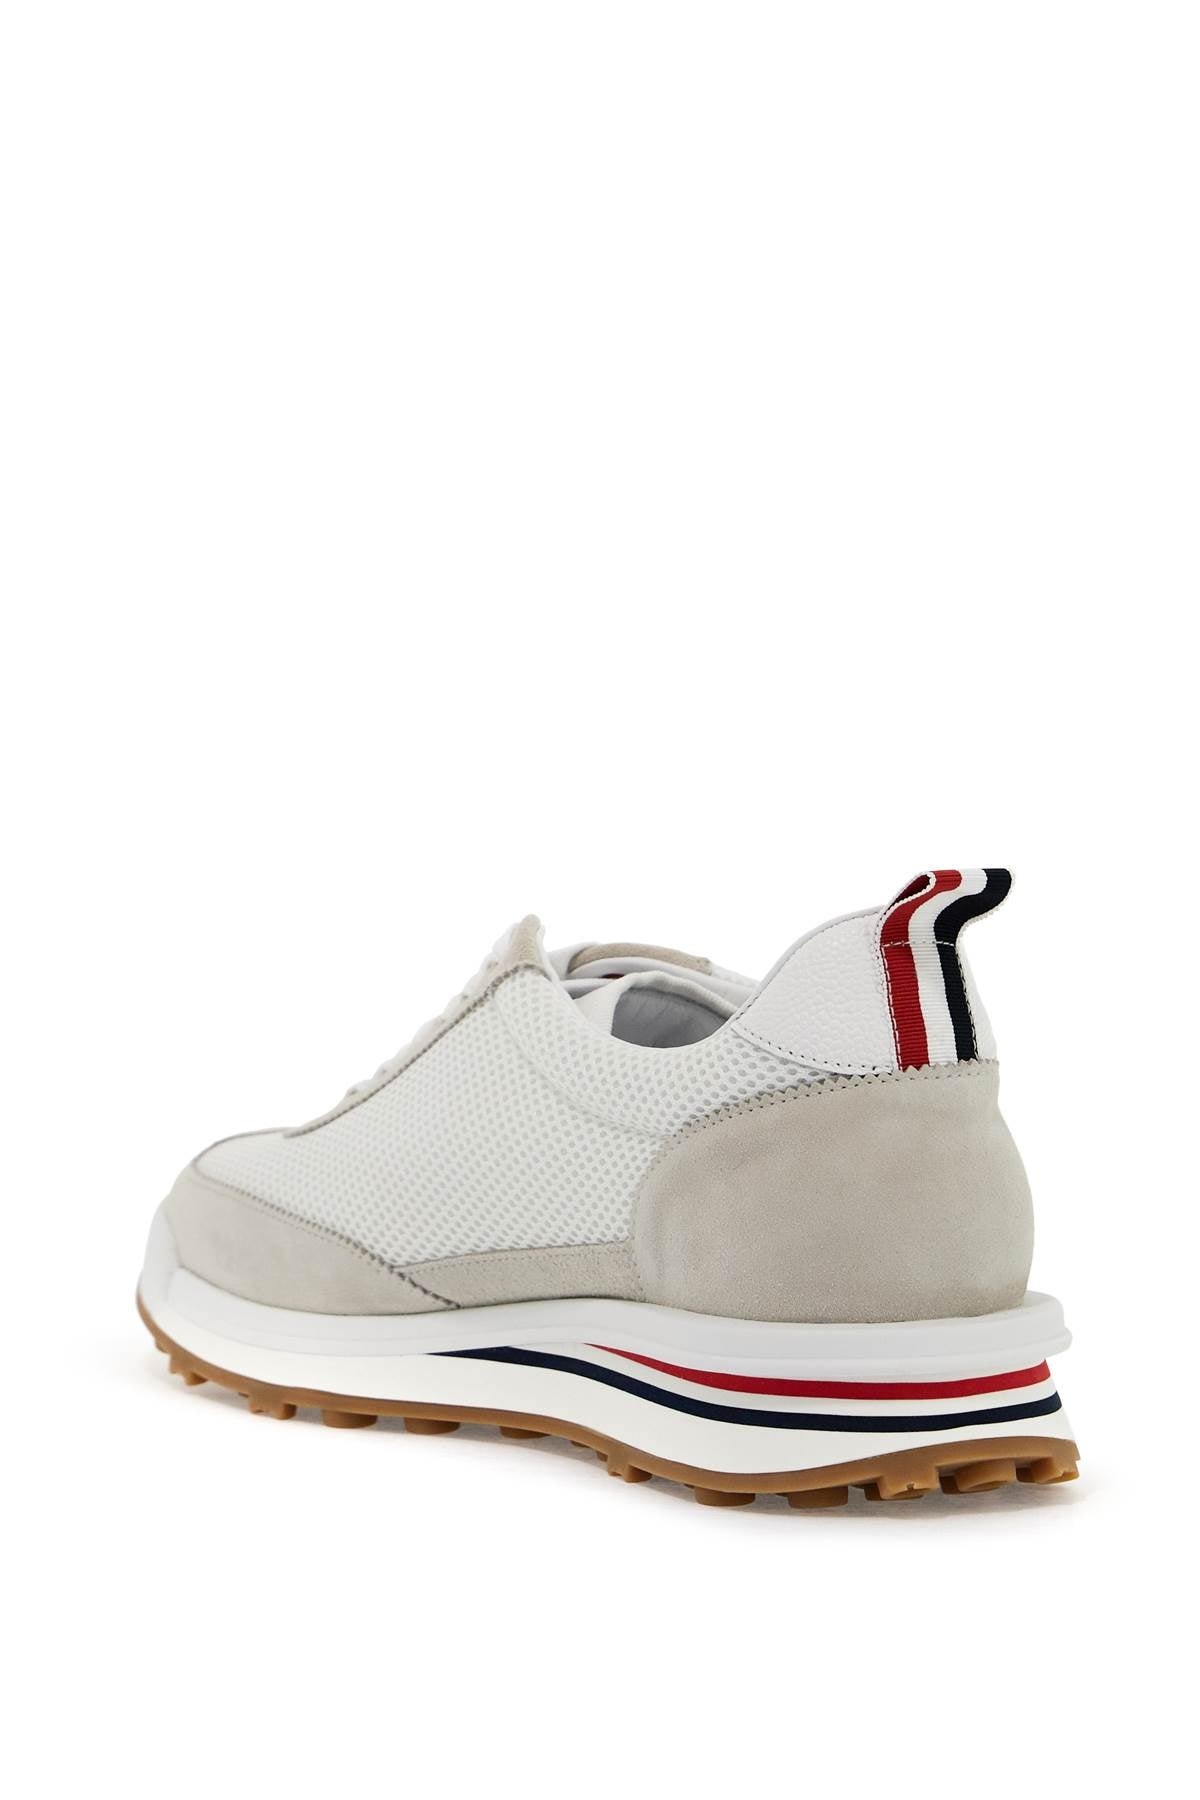 Thom Browne Mesh And Suede Leather Sneakers In 9 Men - 3